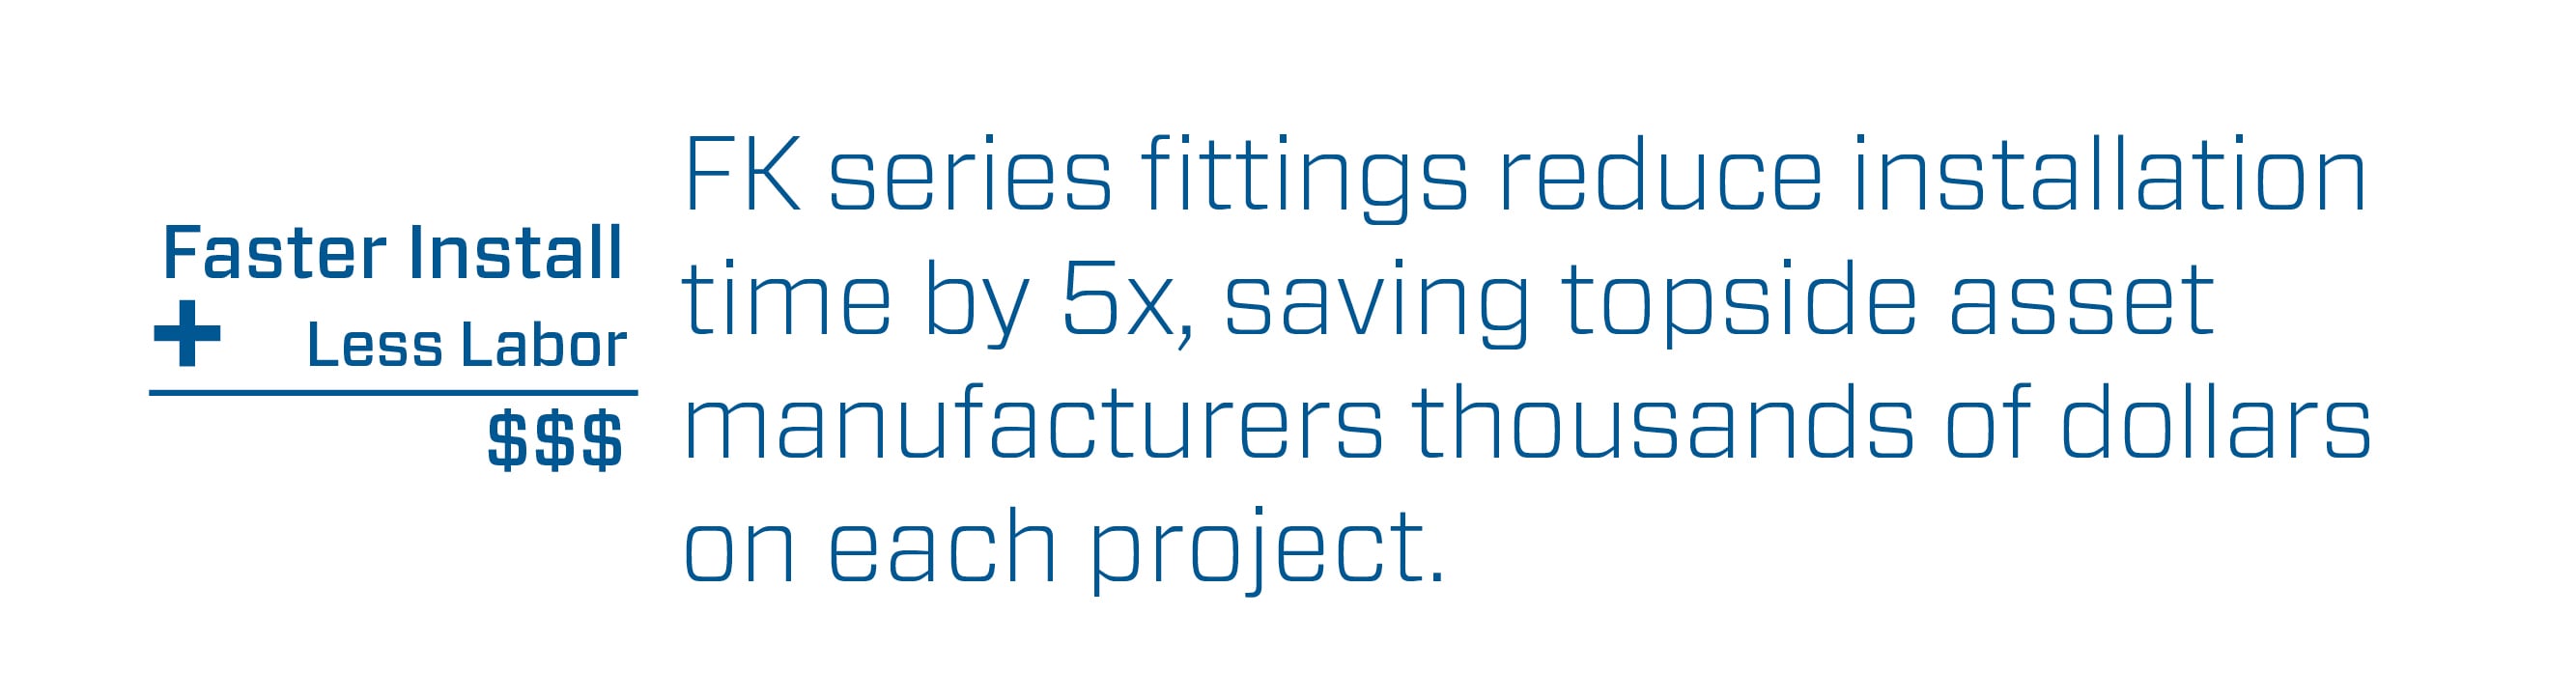 FK Series Fittings Cost Savings Infographic